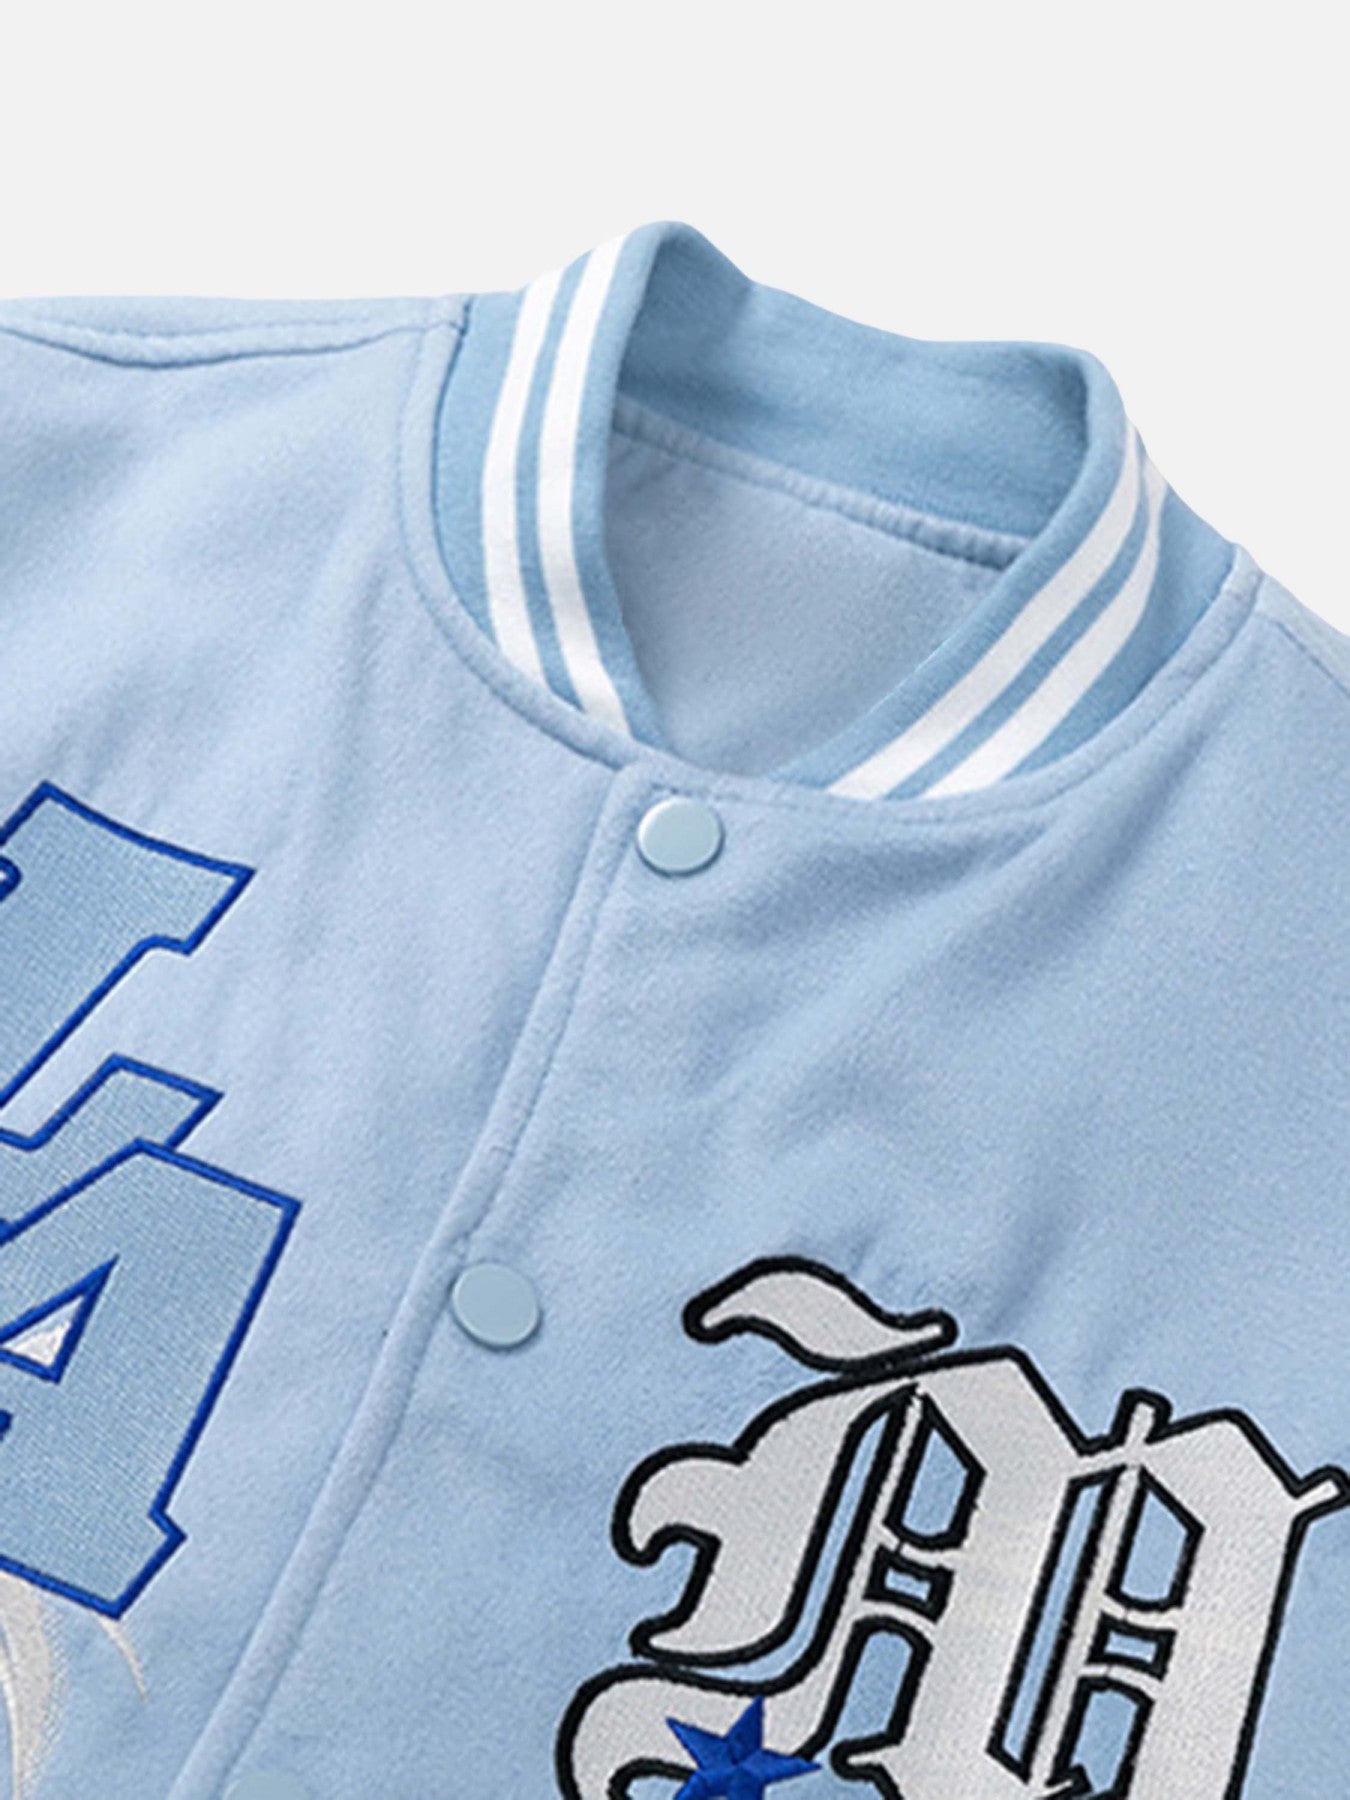 The Supermade Alphabet Embroidery Flame Baseball Jerseys